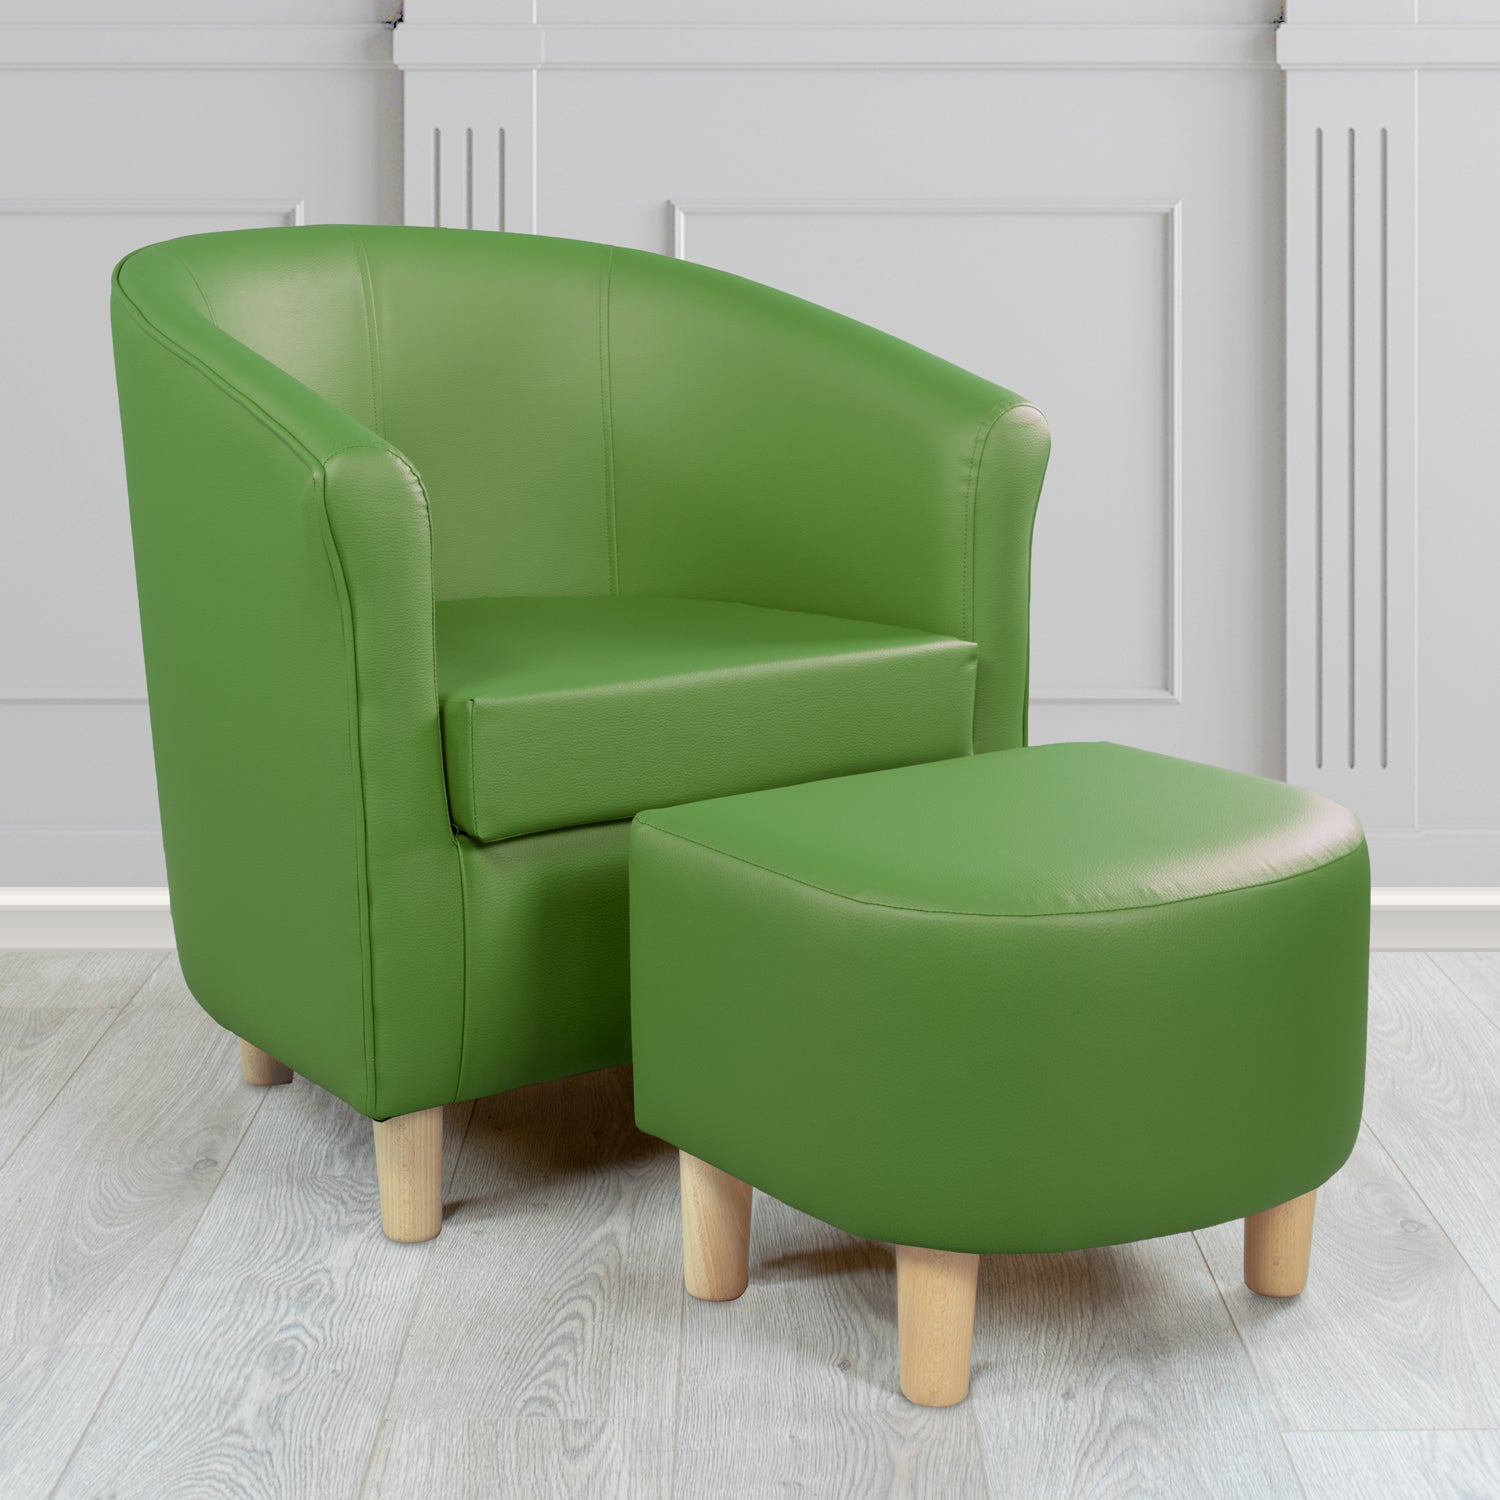 Express Tuscany Green DZE Faux Leather Tub Chair with Footstool Set (6541298565162)